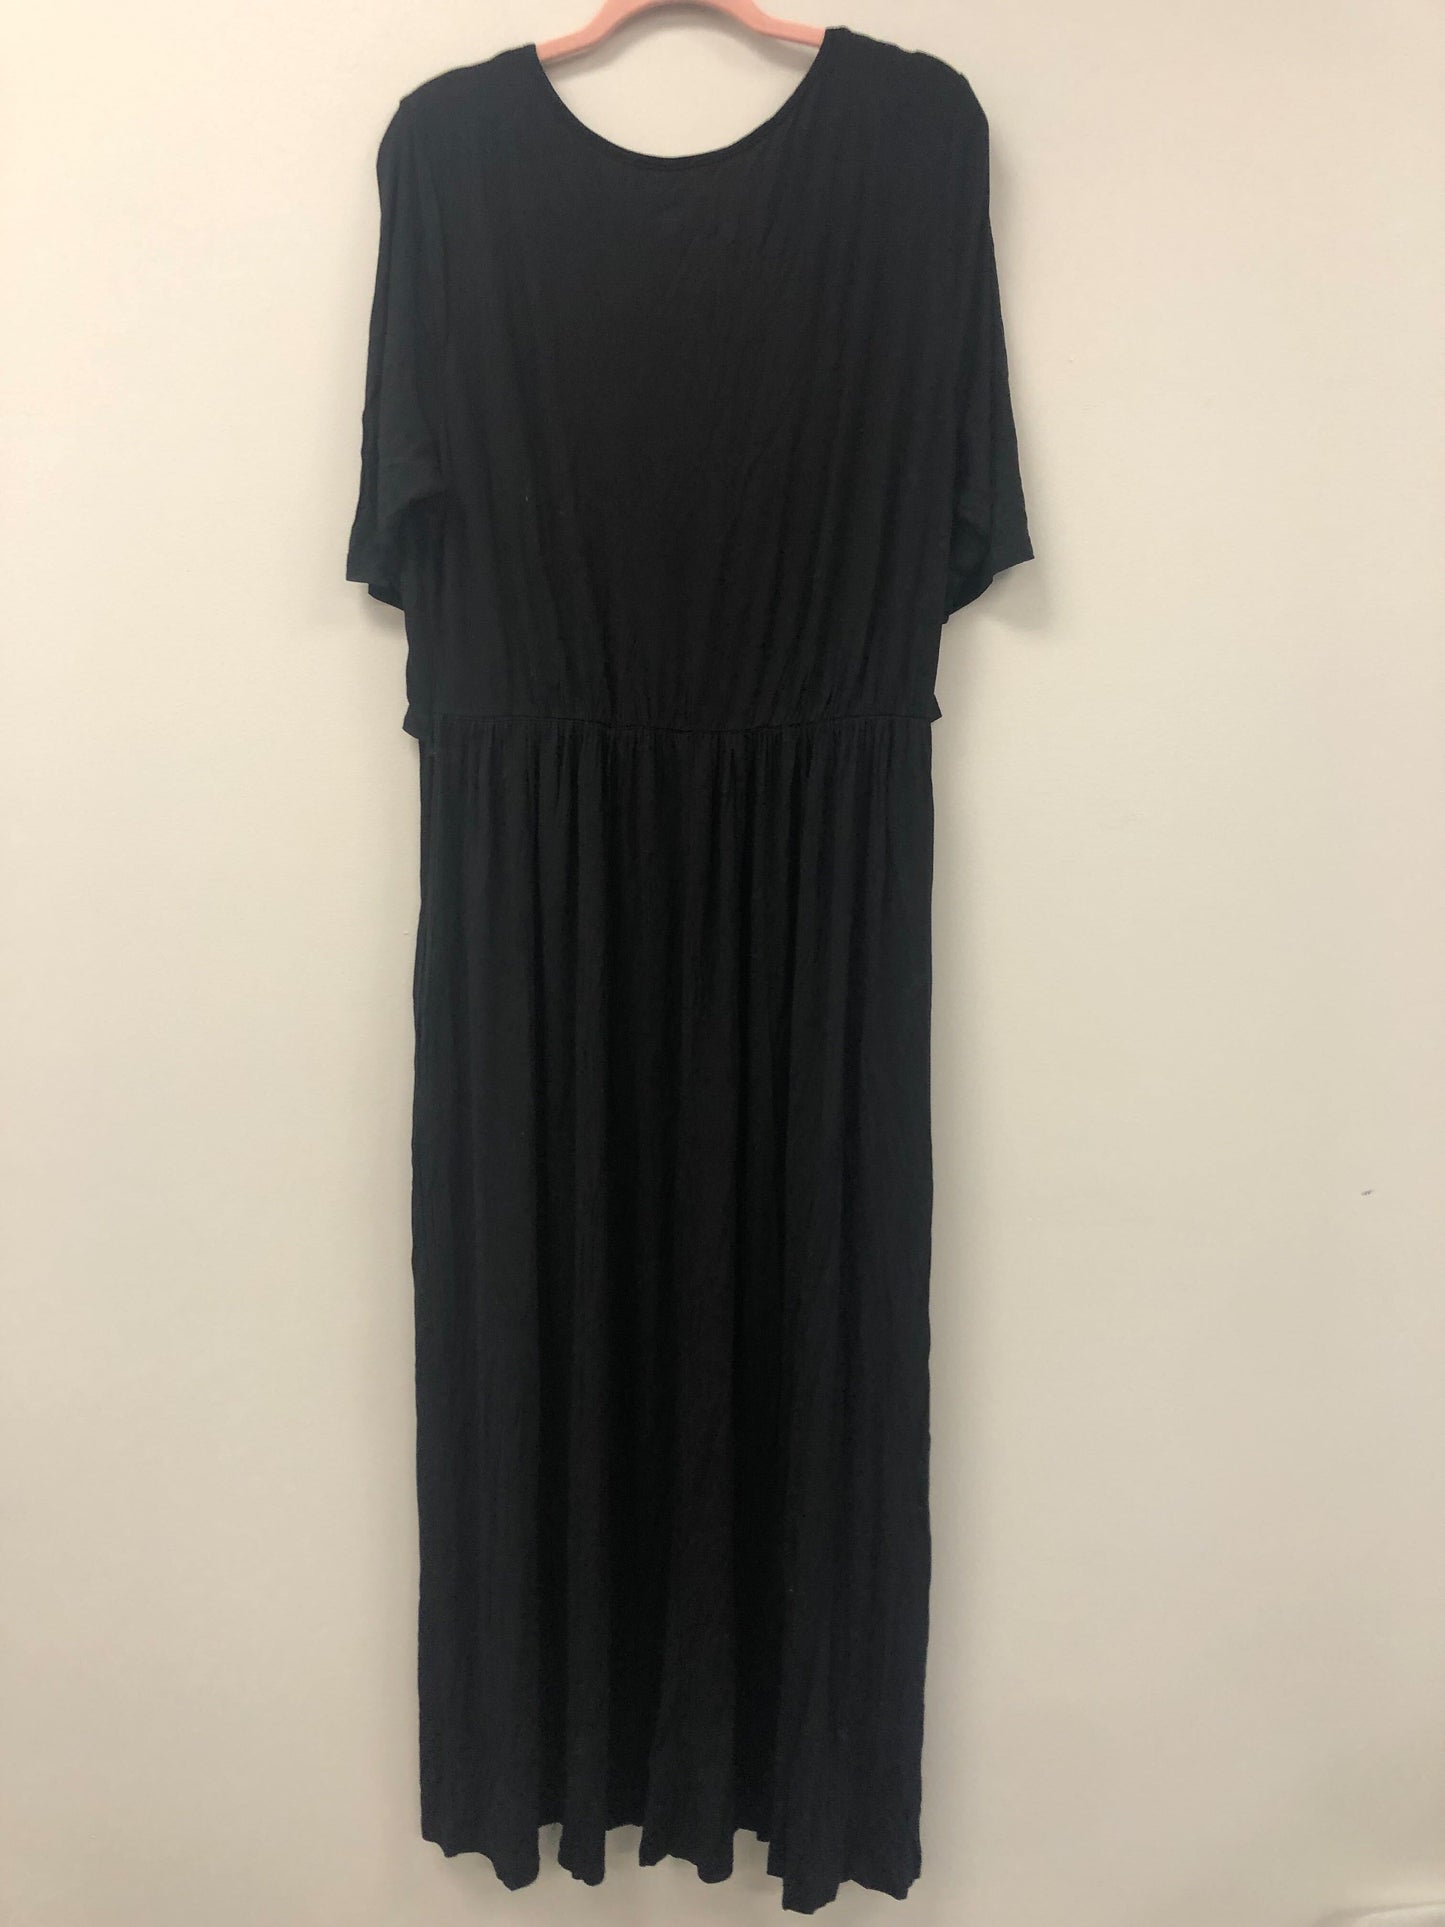 Outlet 5673 - Latched Mama Front Knot Nursing Maxi Dress - Black - 2X